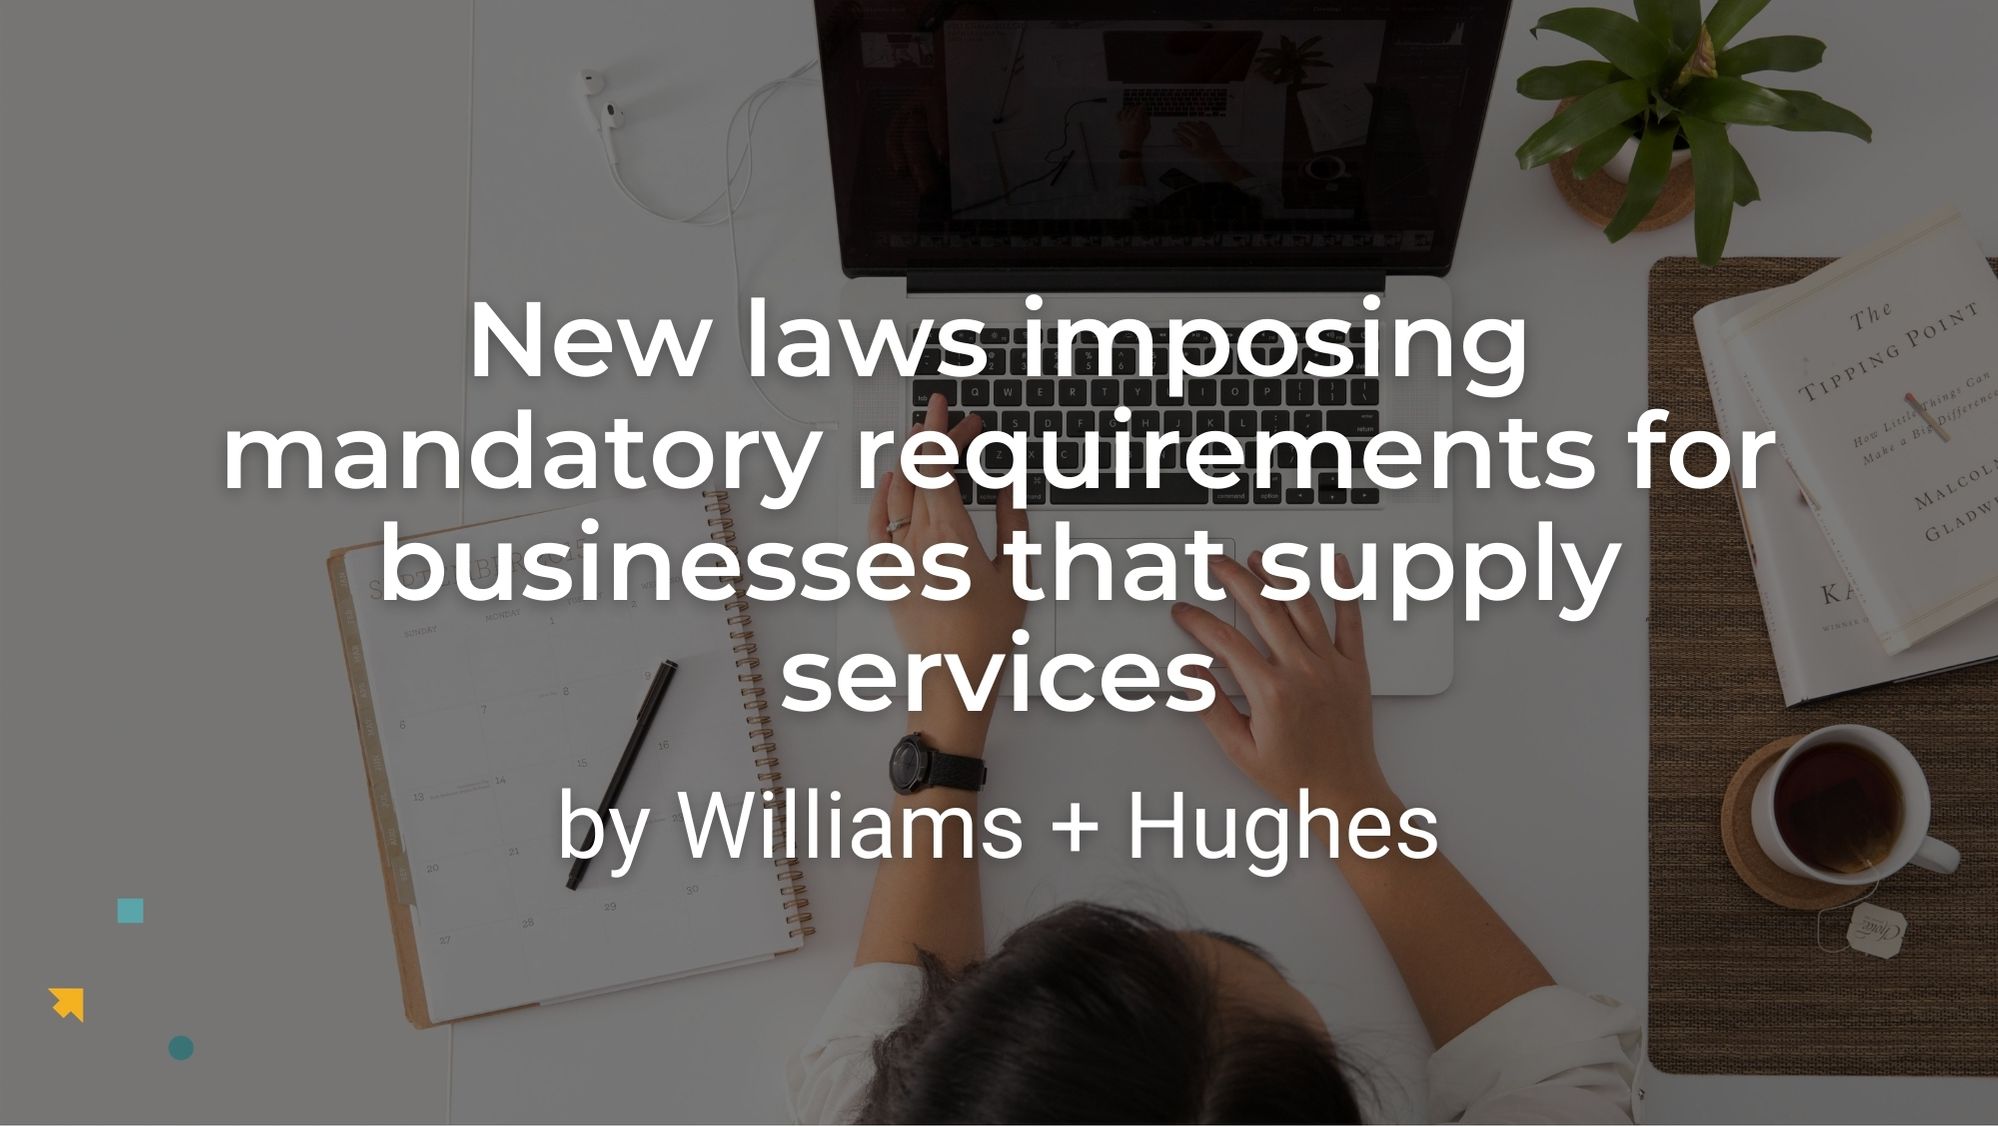 New laws imposing mandatory requirements for businesses that supply services